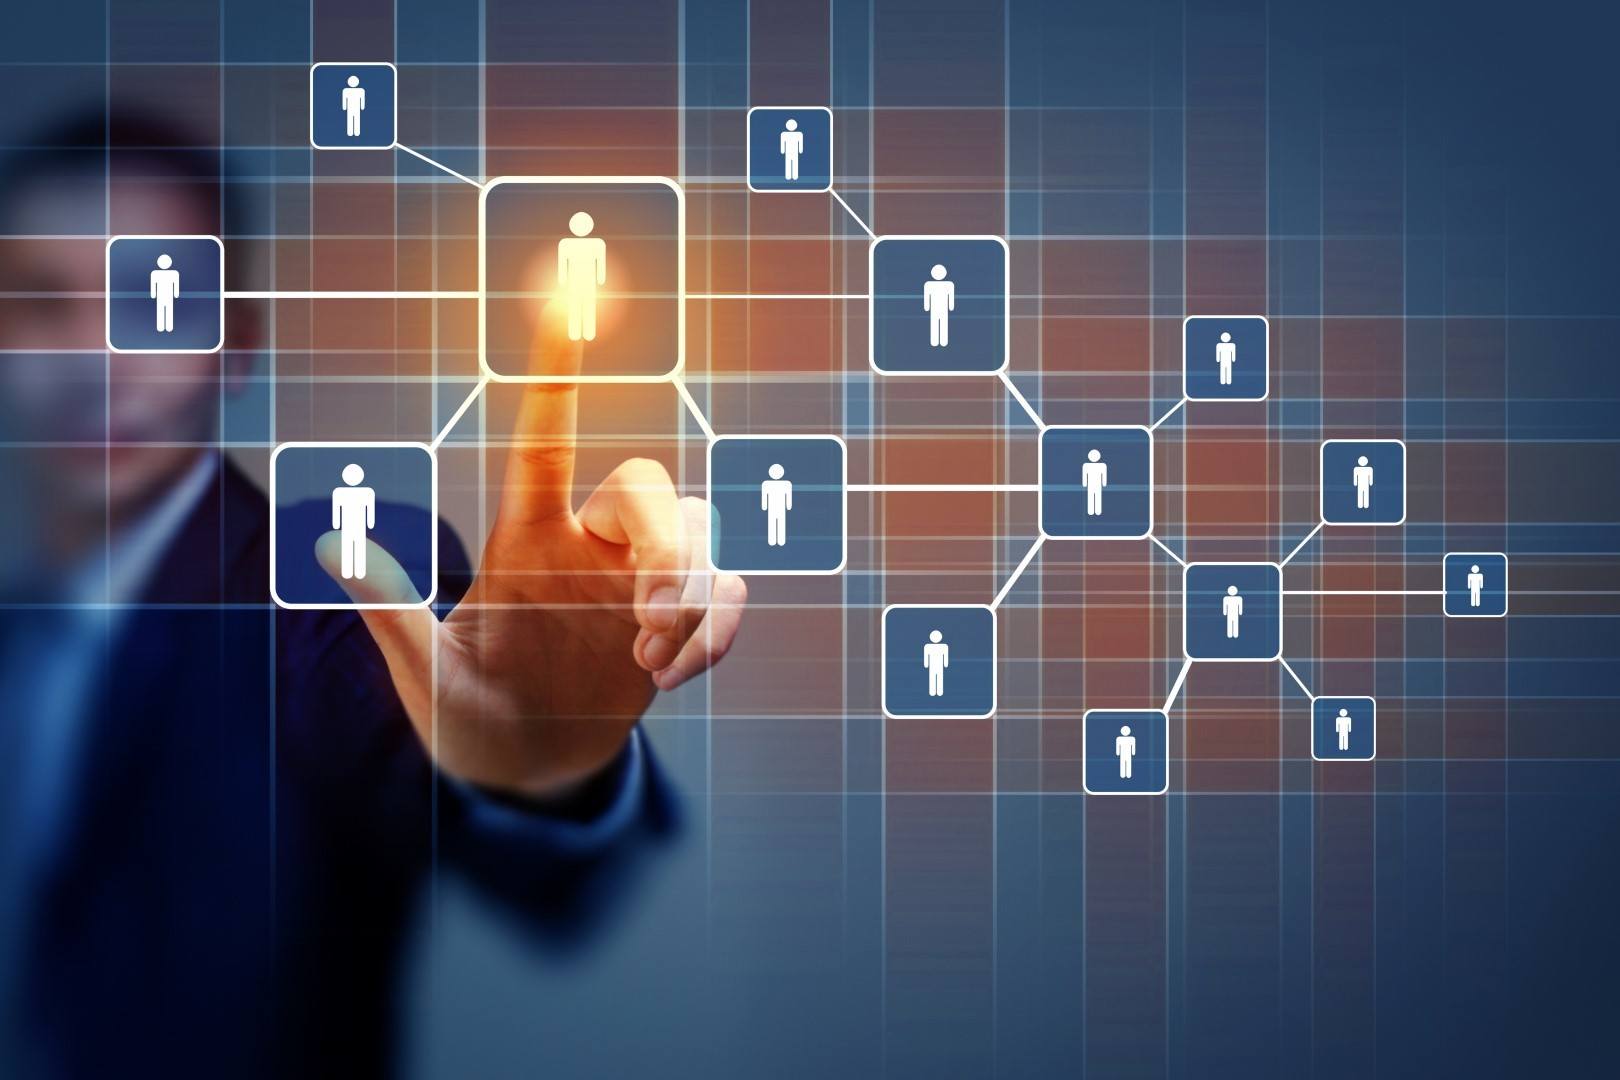 Image of male touching virtual icon of social network